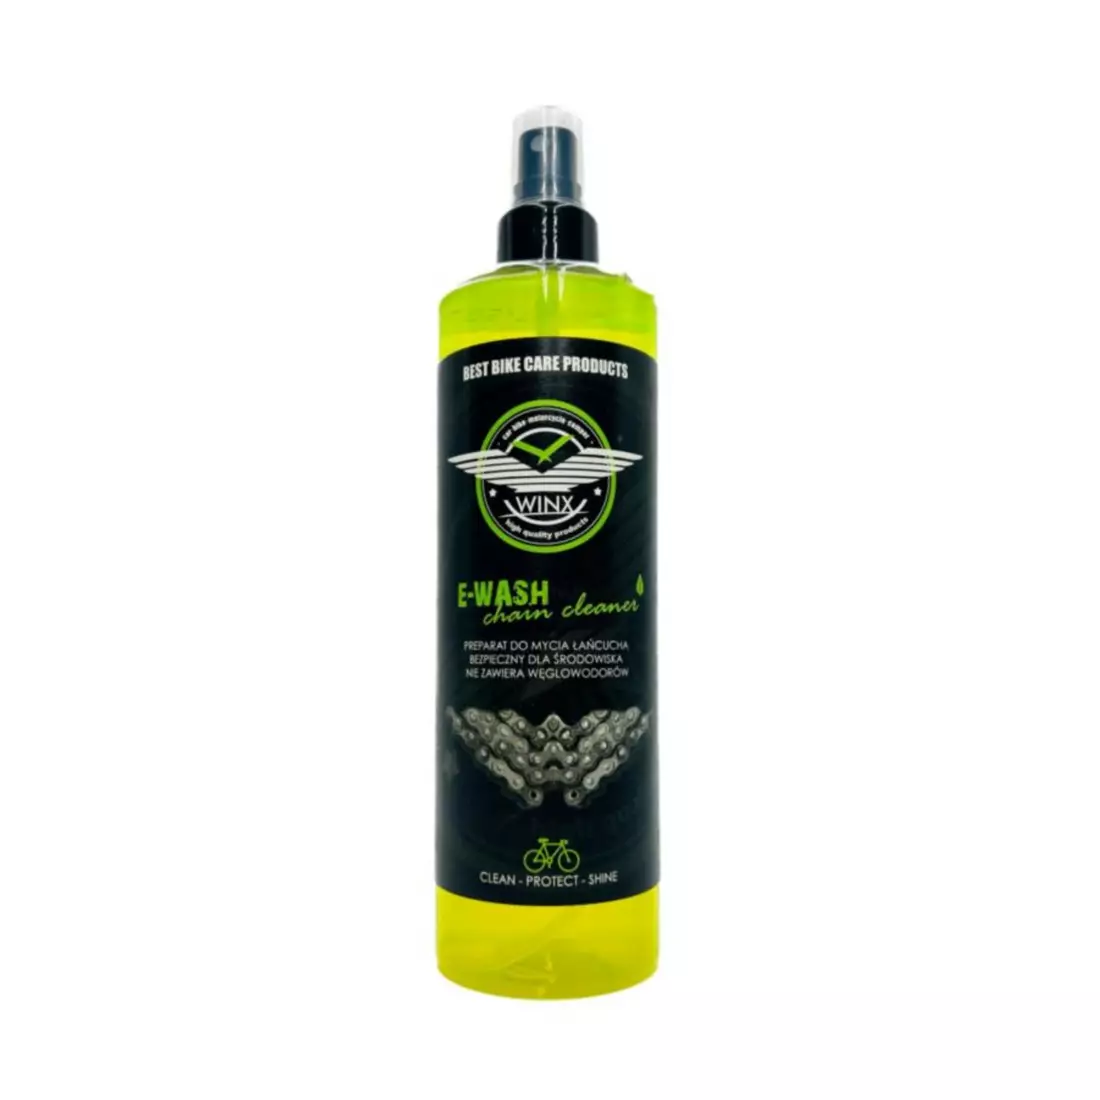 WINX Bicycle chain degreaser E-WASH 400 ml